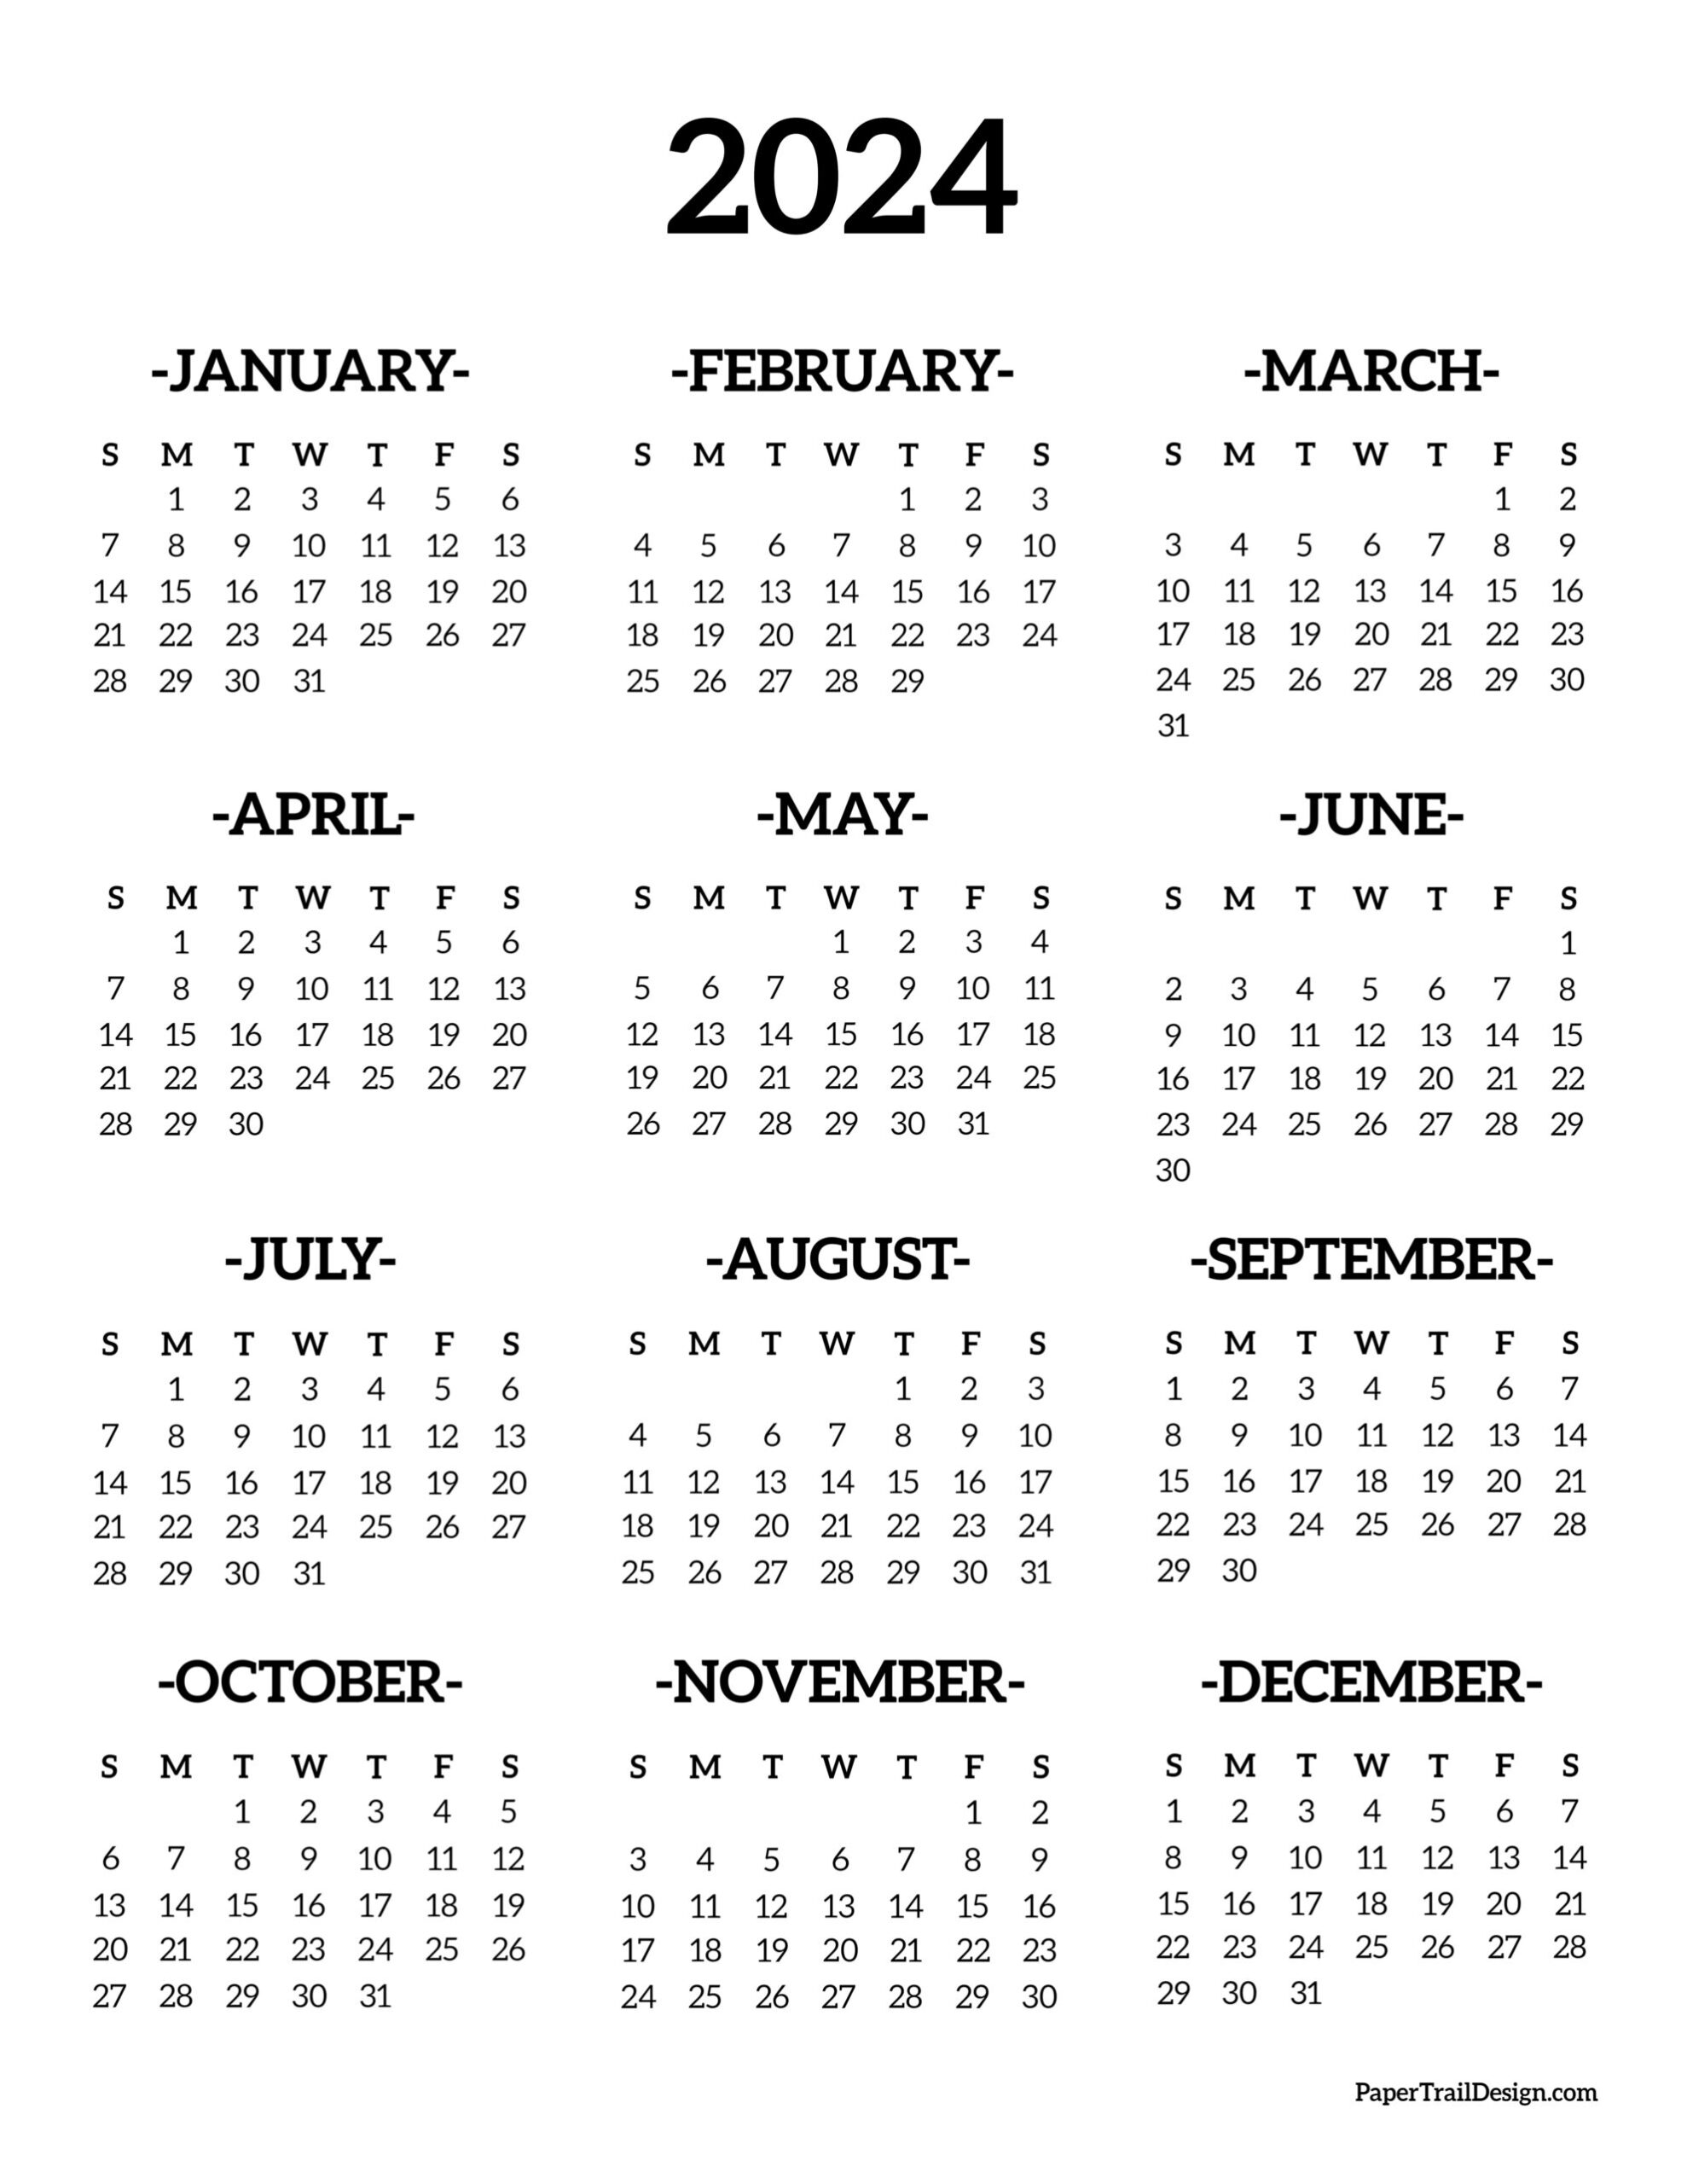 Calendar 2024 Printable One Page - Paper Trail Design for Free 2024 Yearly Calendar Printable